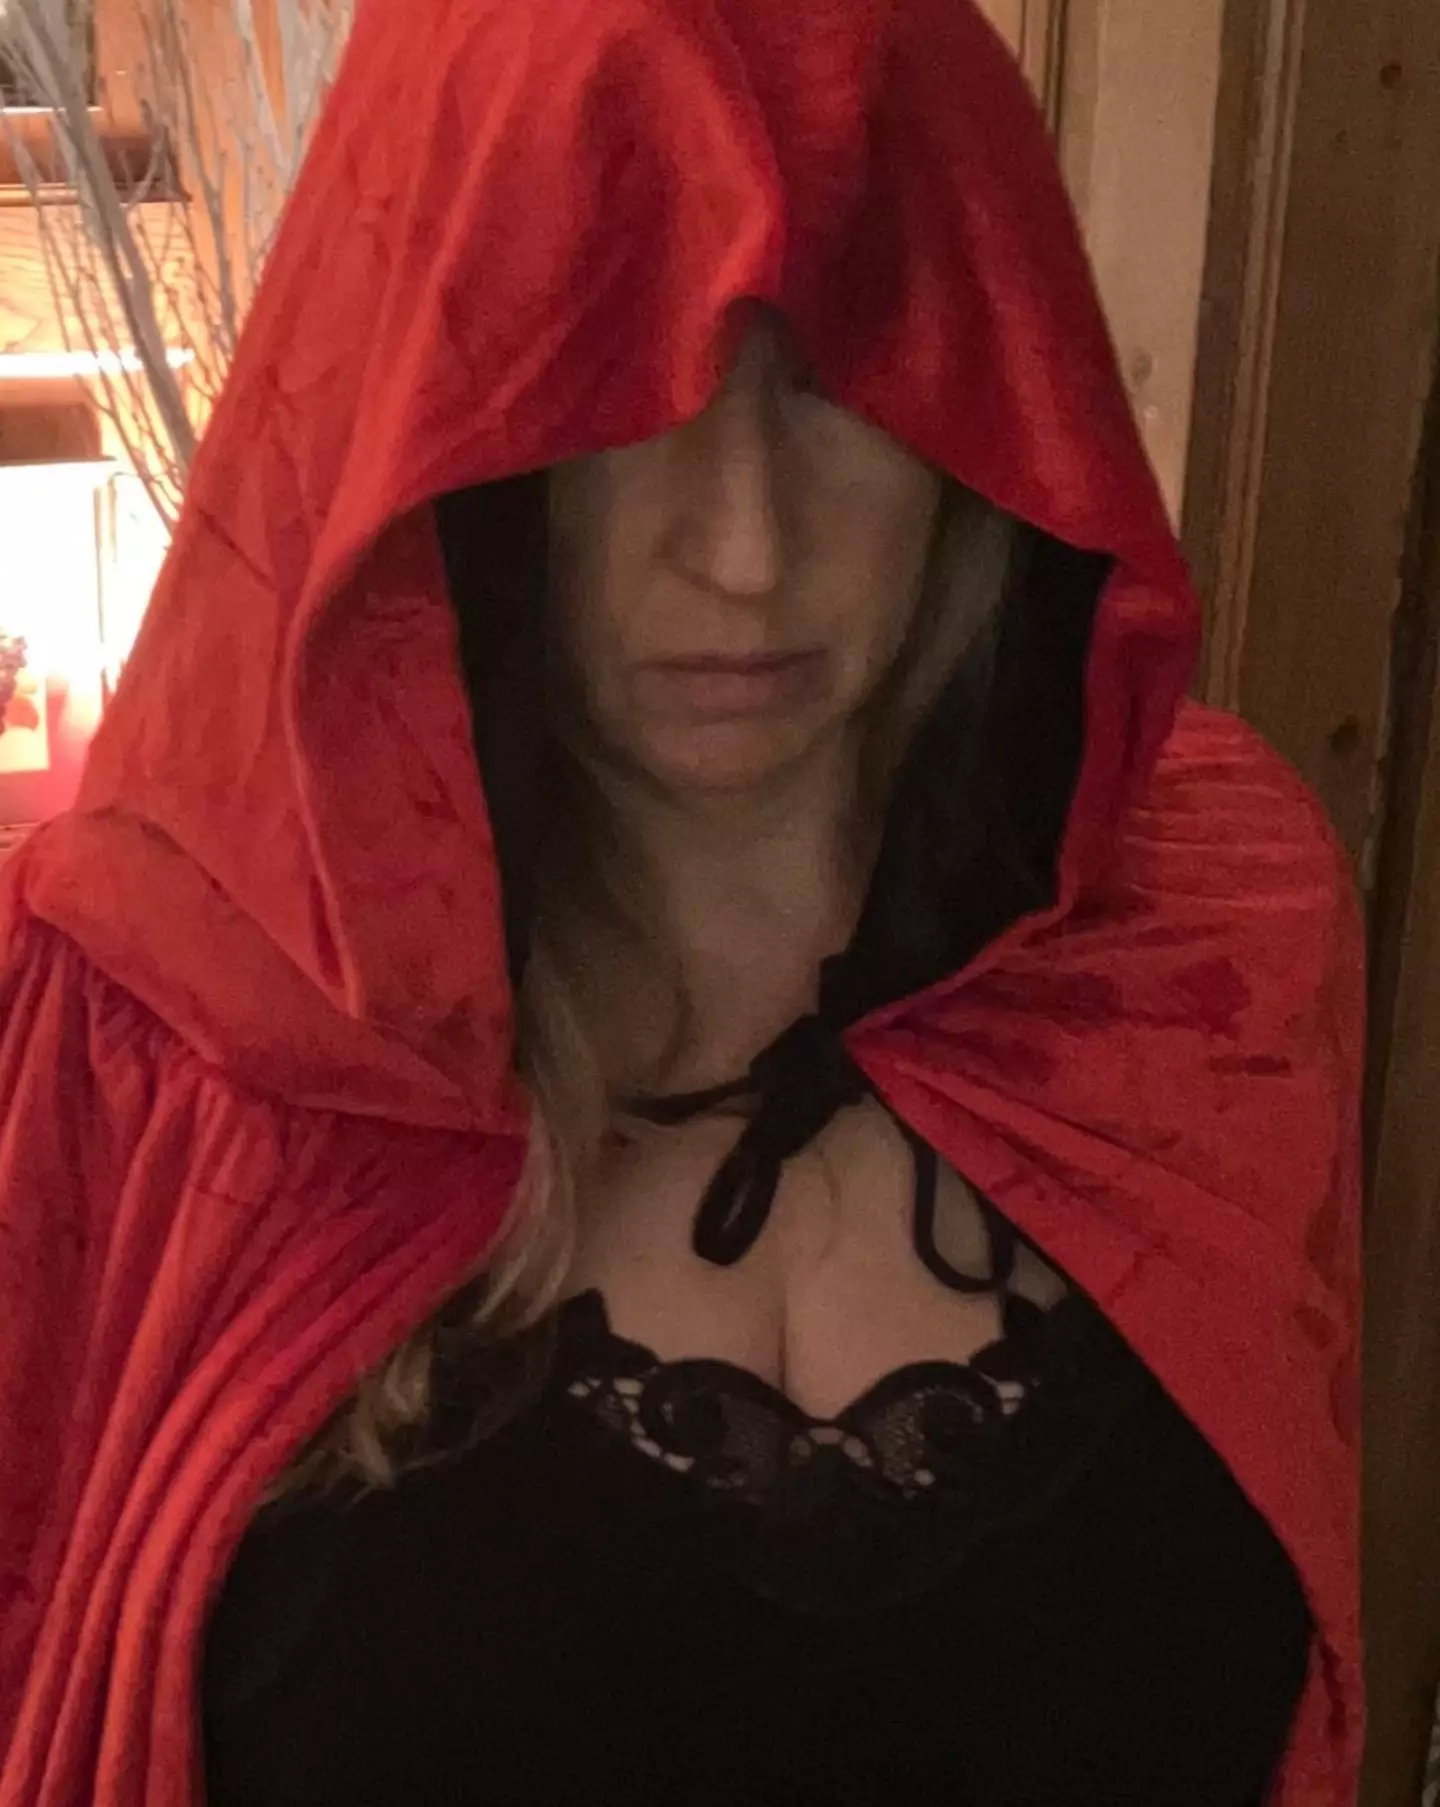 Victoria Coren wore a cloak and explained why on social media.